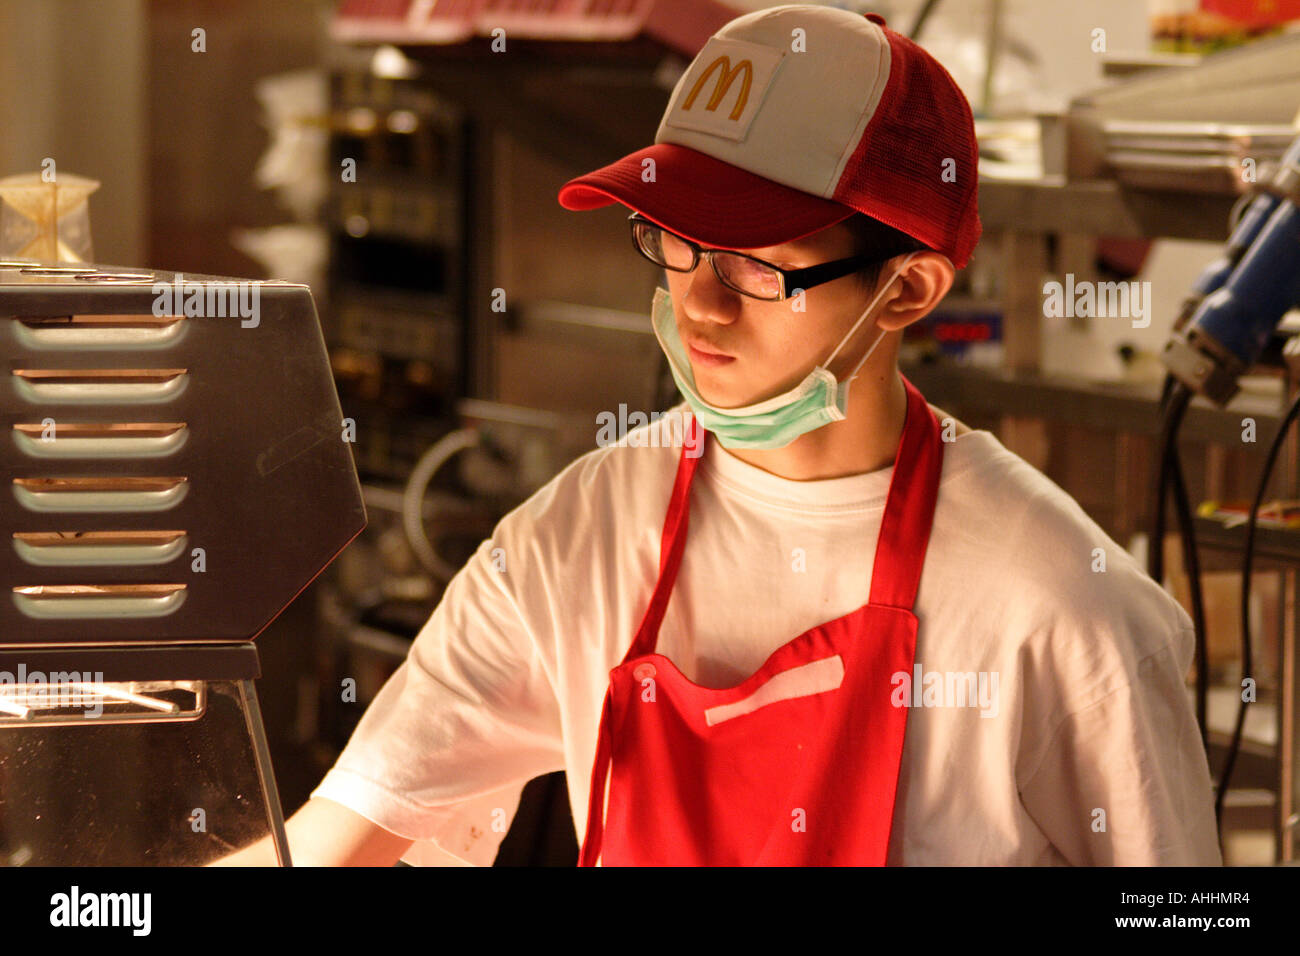 McDonalds Employee in front of the French Fry Frier in Hong Kong Stock Photo